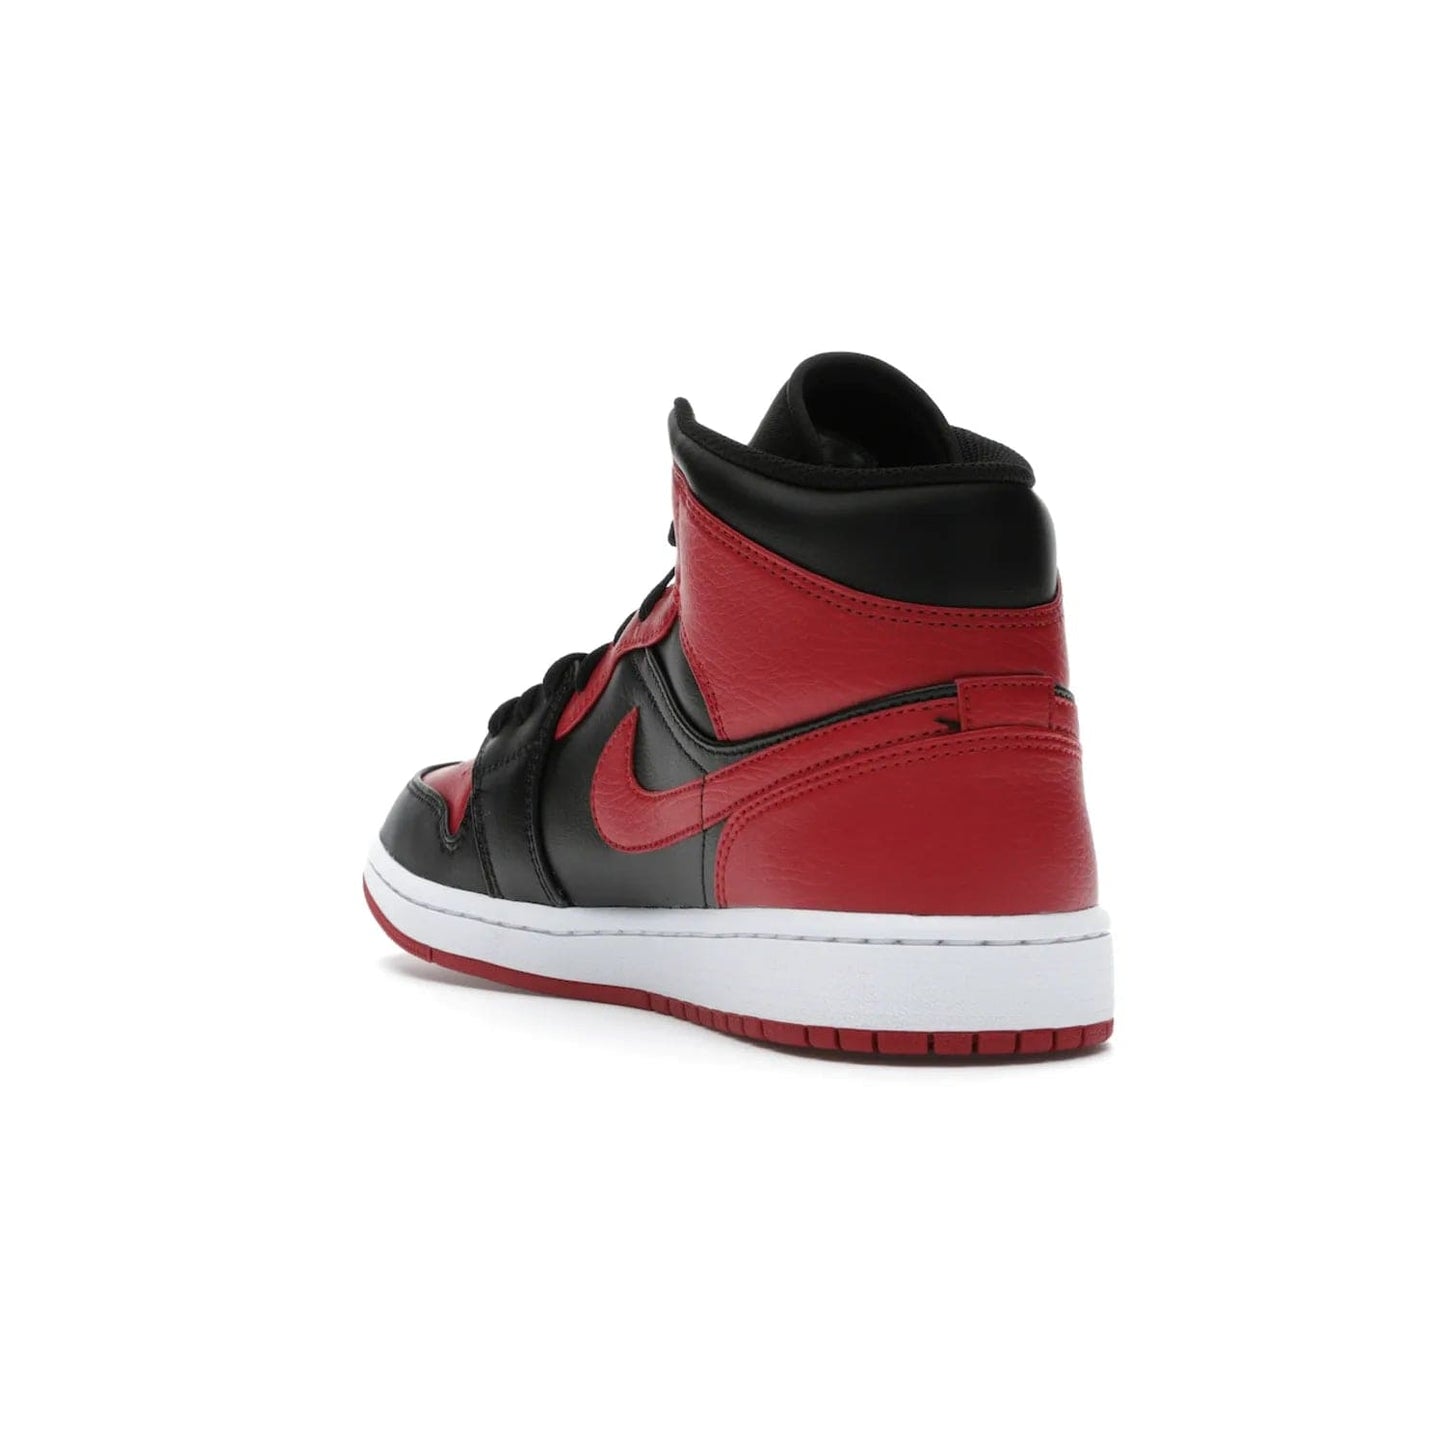 Jordan 1 Mid Banned (2020) - Image 25 - Only at www.BallersClubKickz.com - The Air Jordan 1 Mid Banned (2020) brings a modern twist to the classic Banned colorway. Features full-grain black and red leather uppers, red leather around the toe, collar, heel, & Swoosh. Release November 2021 for $110.